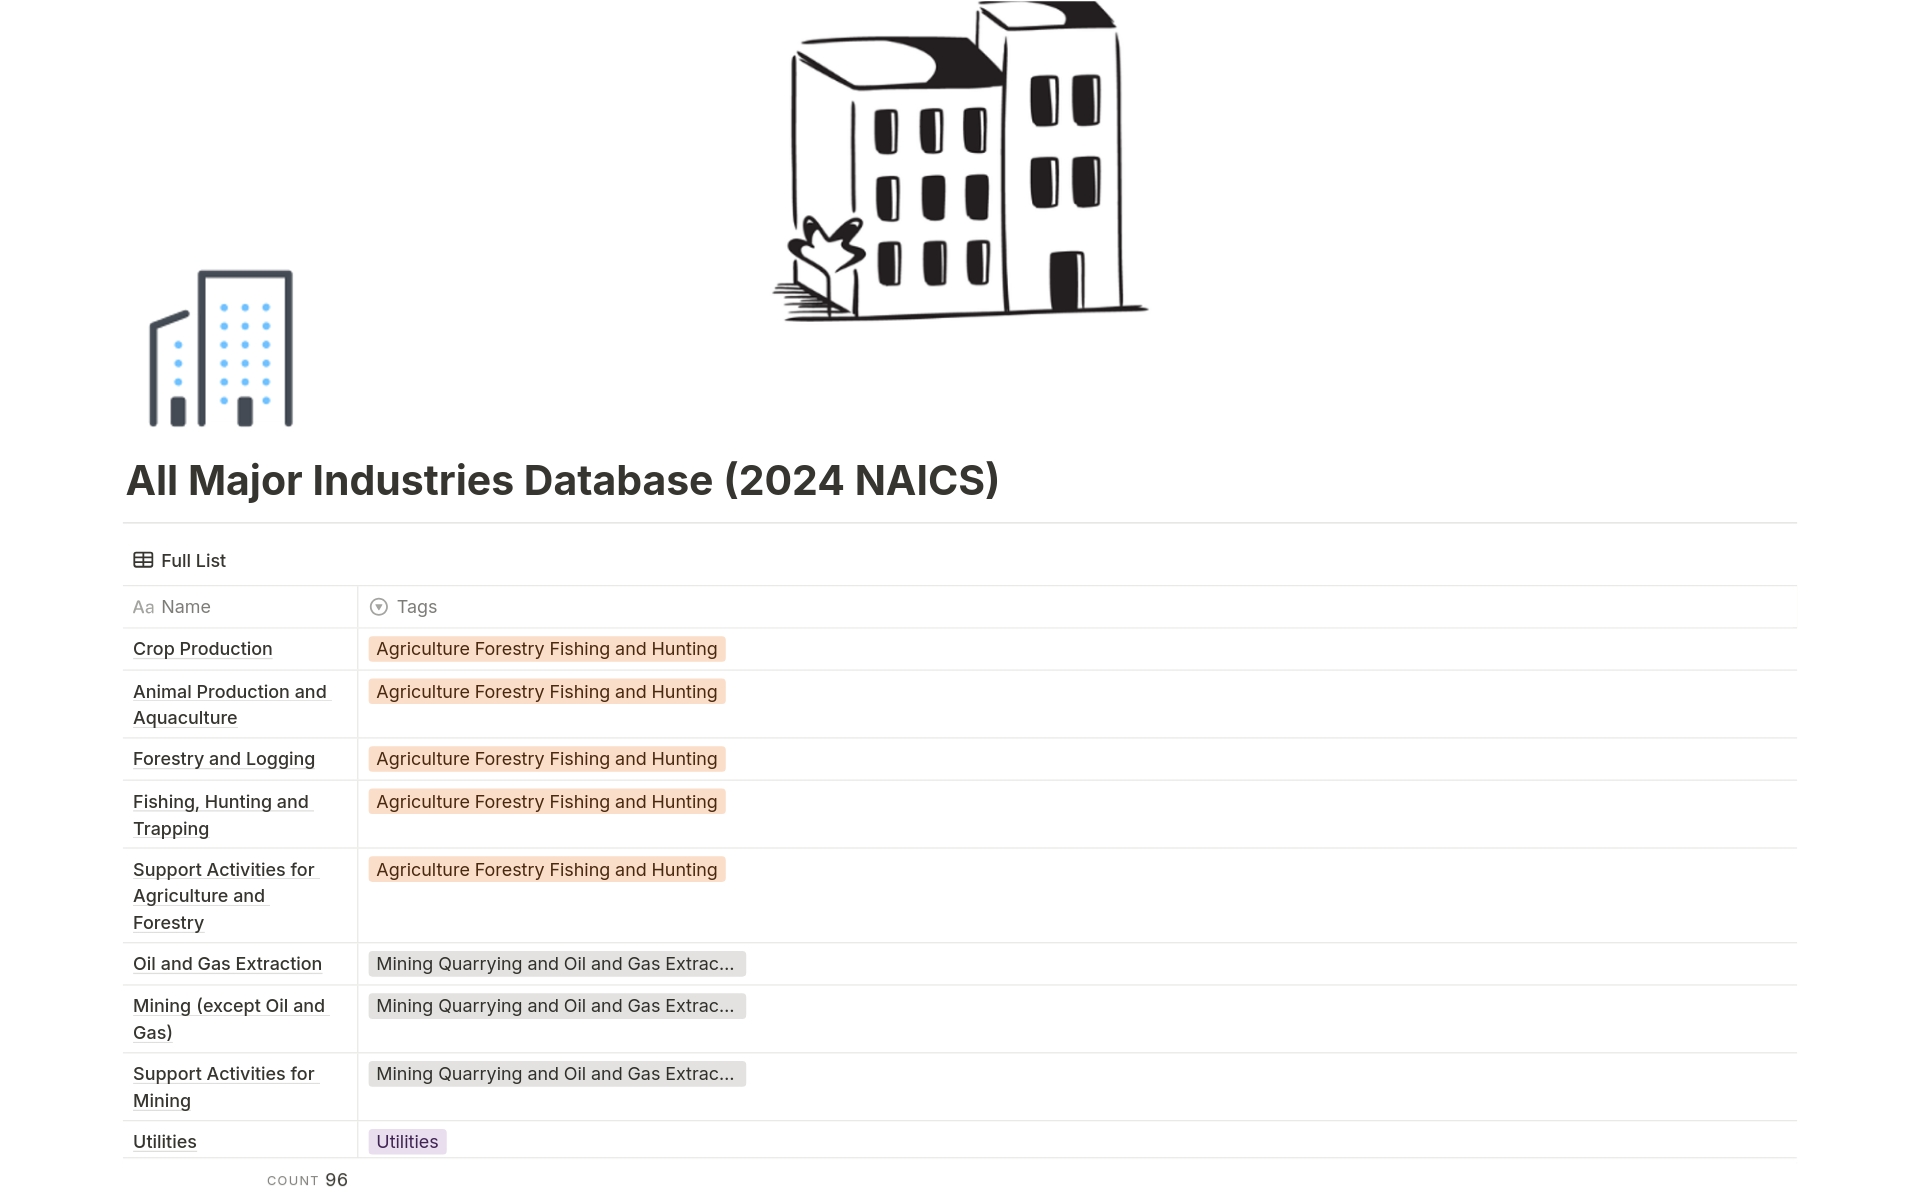 Explore a comprehensive database featuring a diverse array of major industries categorized according to the latest NAICS codes for 2024. Gain insights into each industry's name and its corresponding category, empowering your research and understanding of the contemporary business